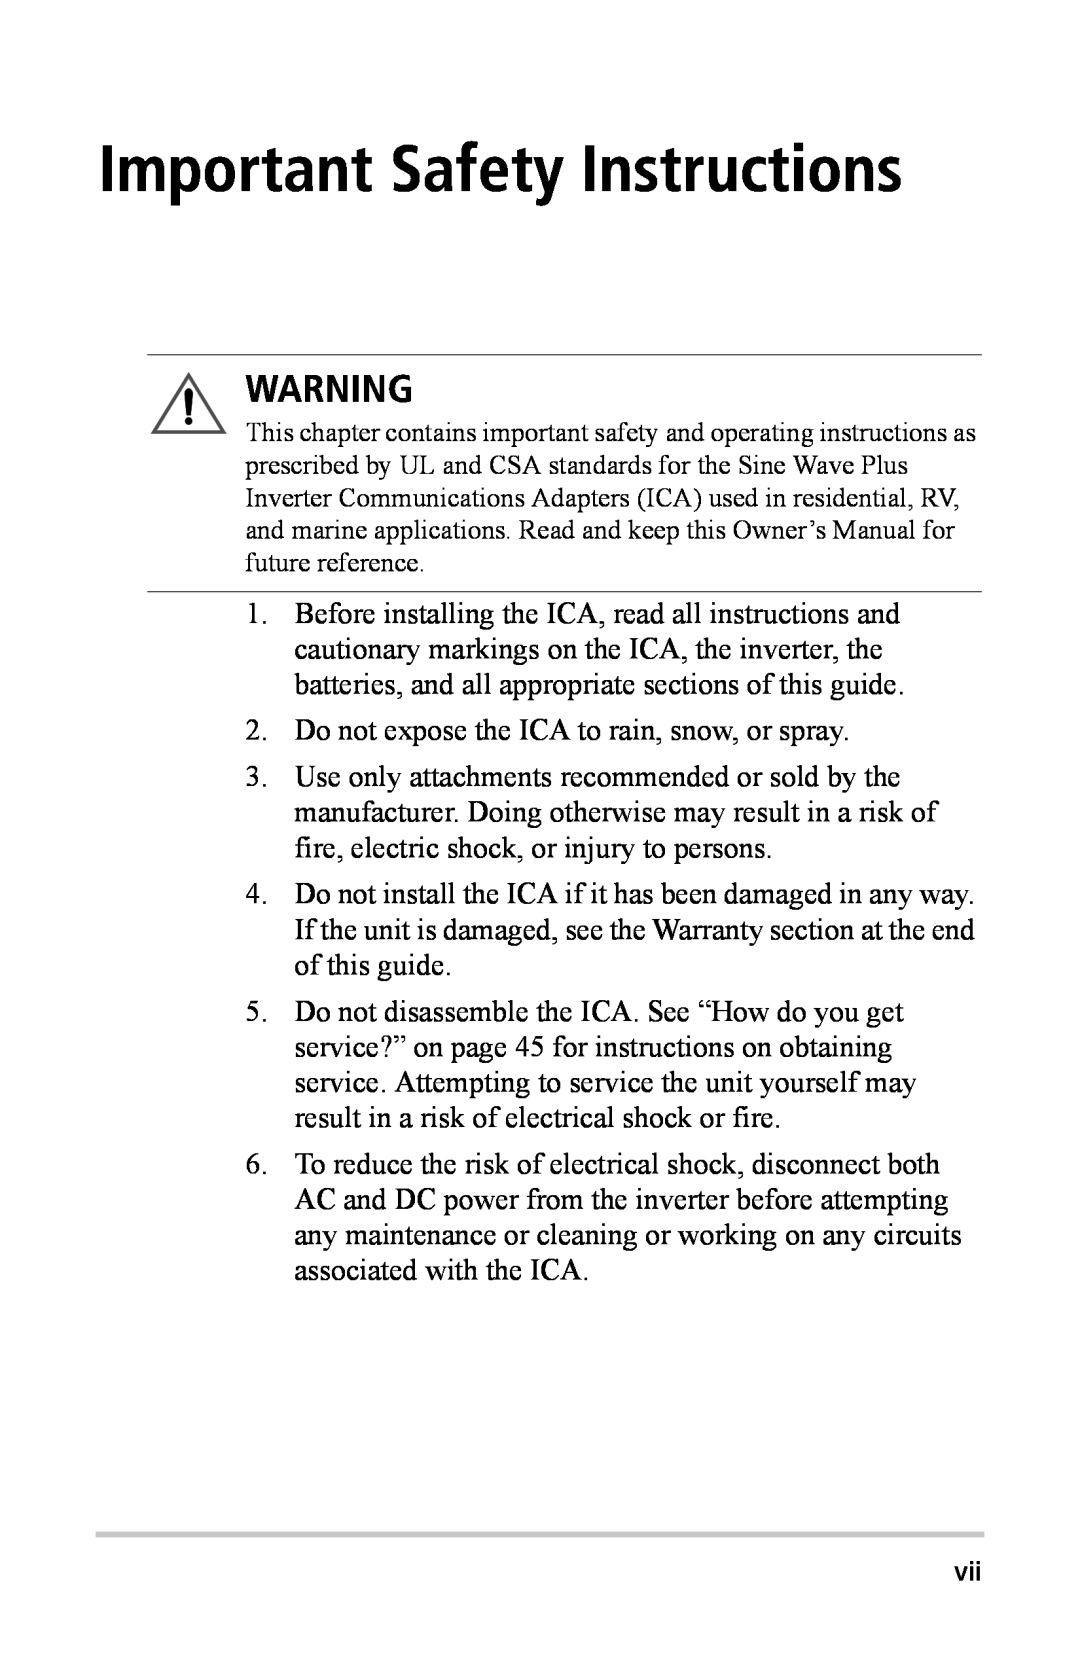 Xantrex Technology Inverter Communications Adapter manual Important Safety Instructions 